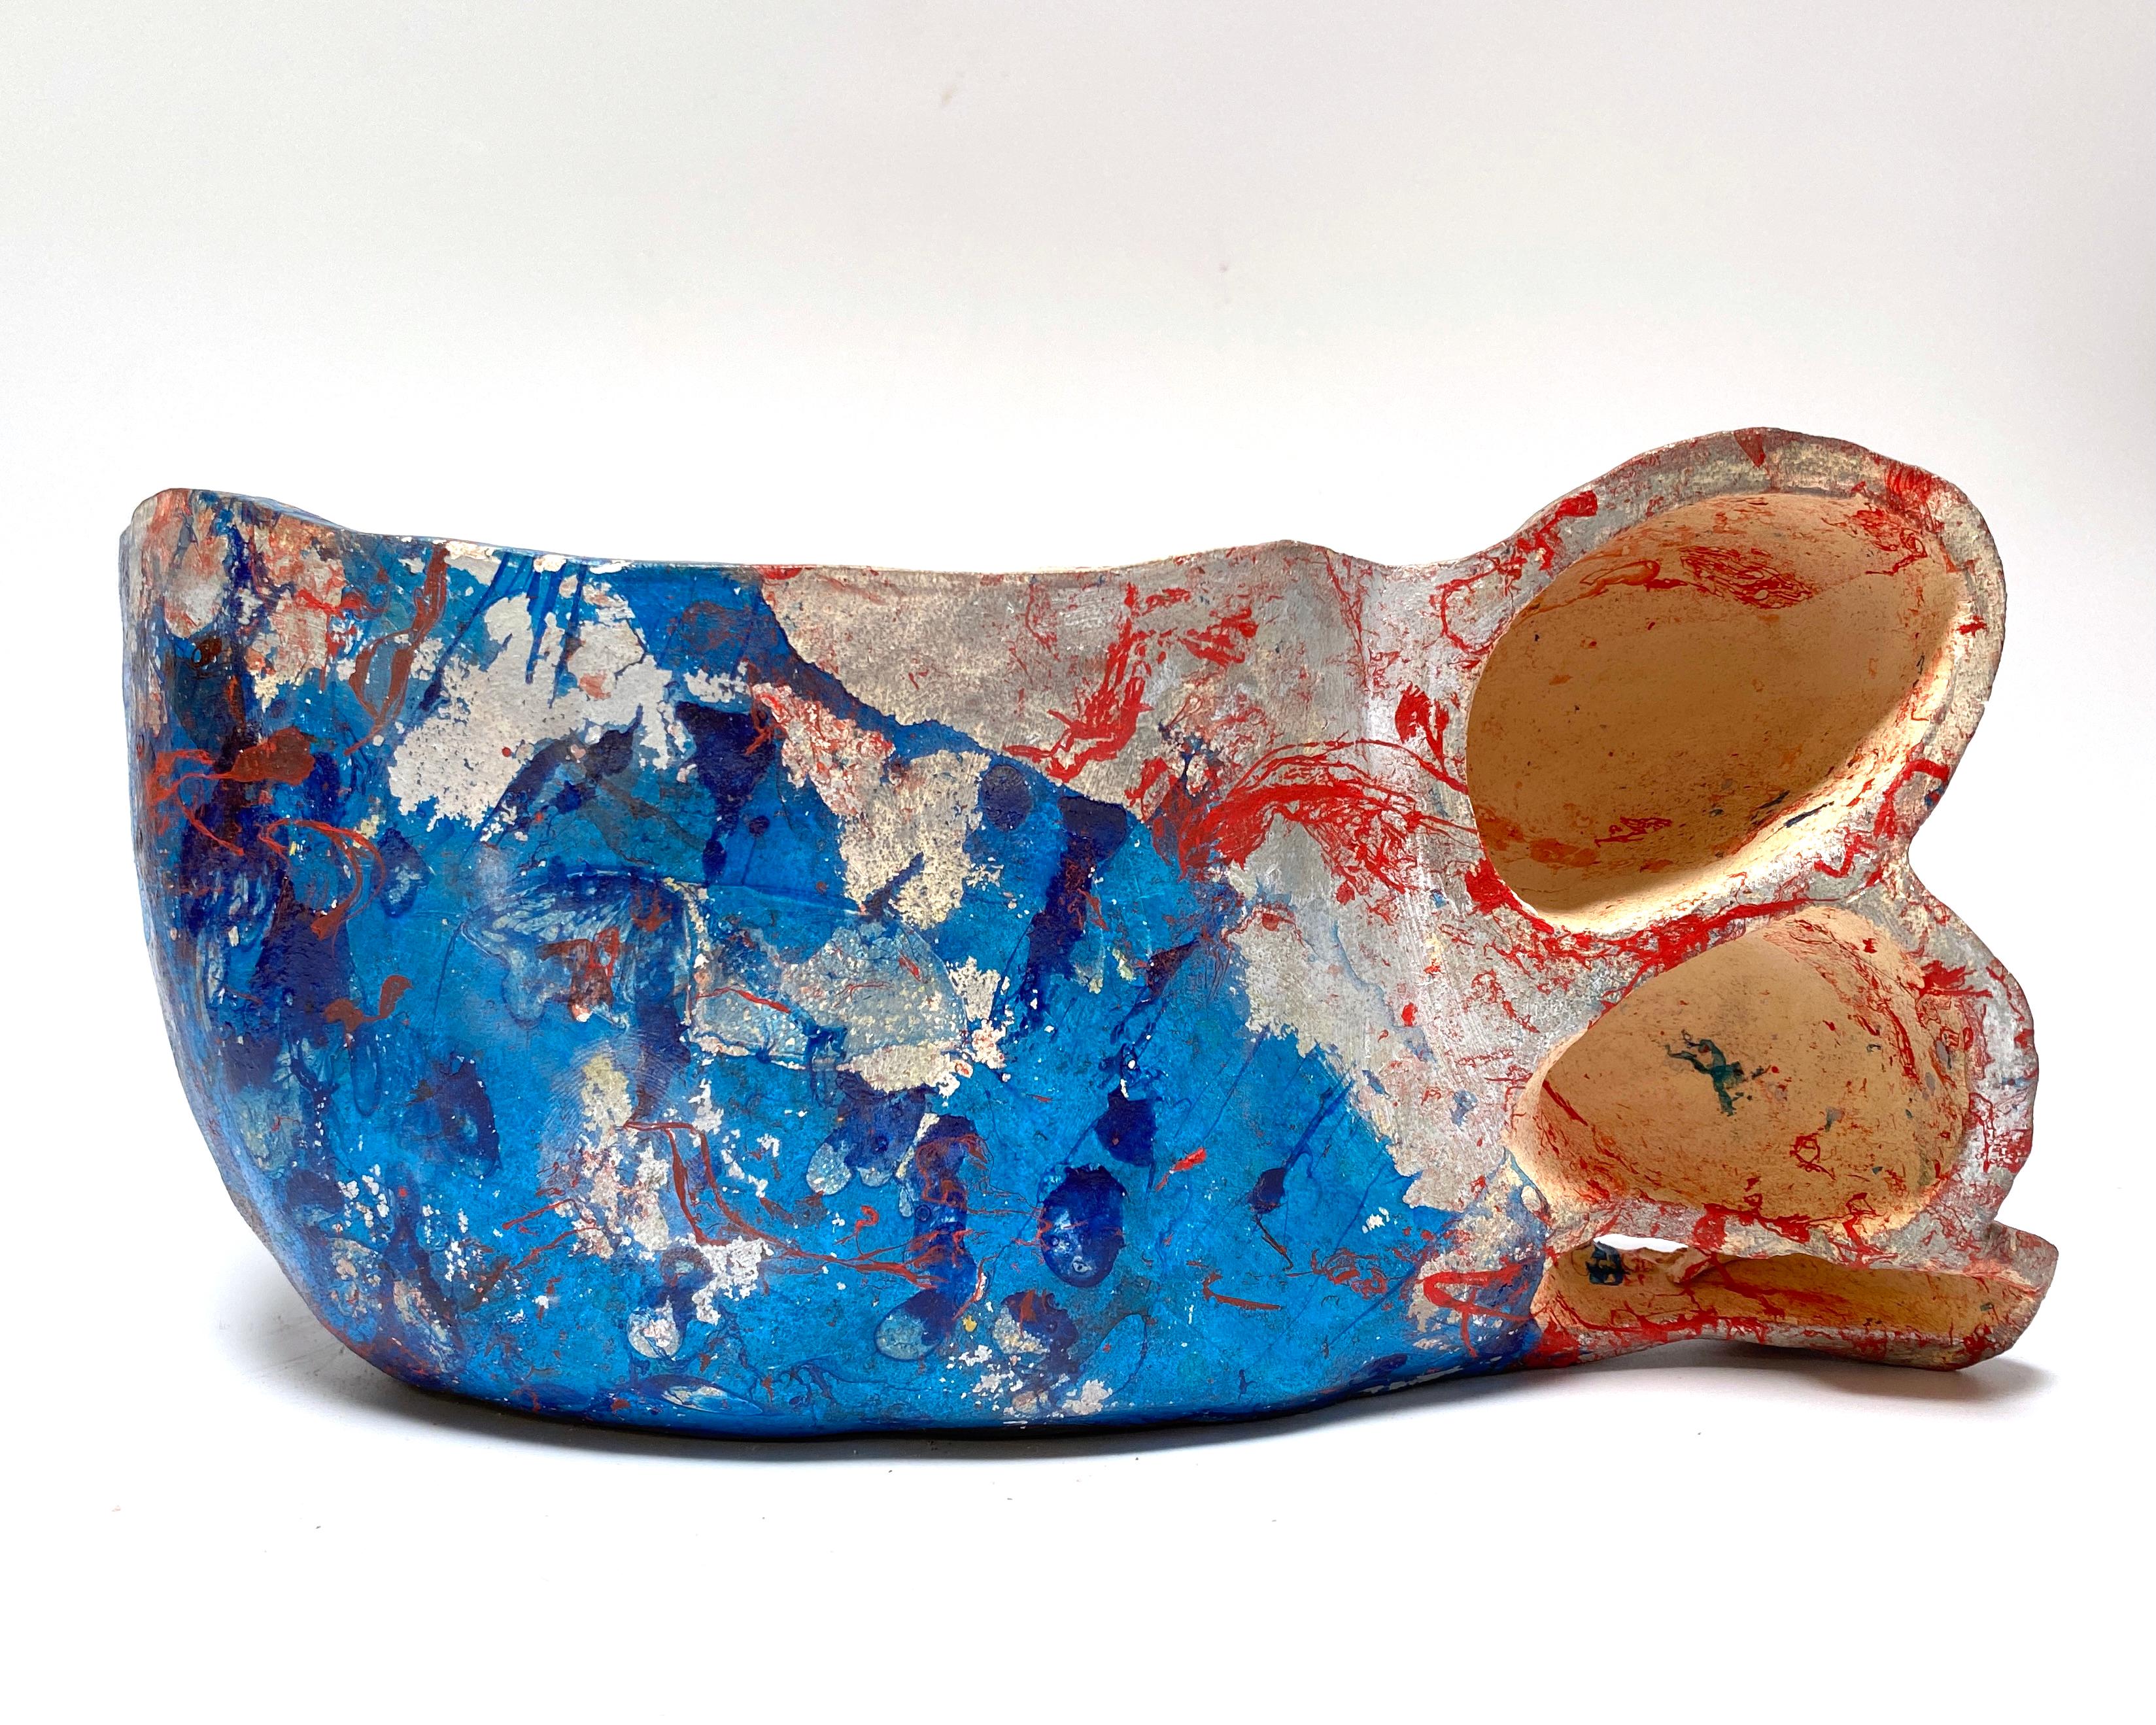 Justin Siegel, Untitled (Silver, Red and Blue), Ceramic, 2021